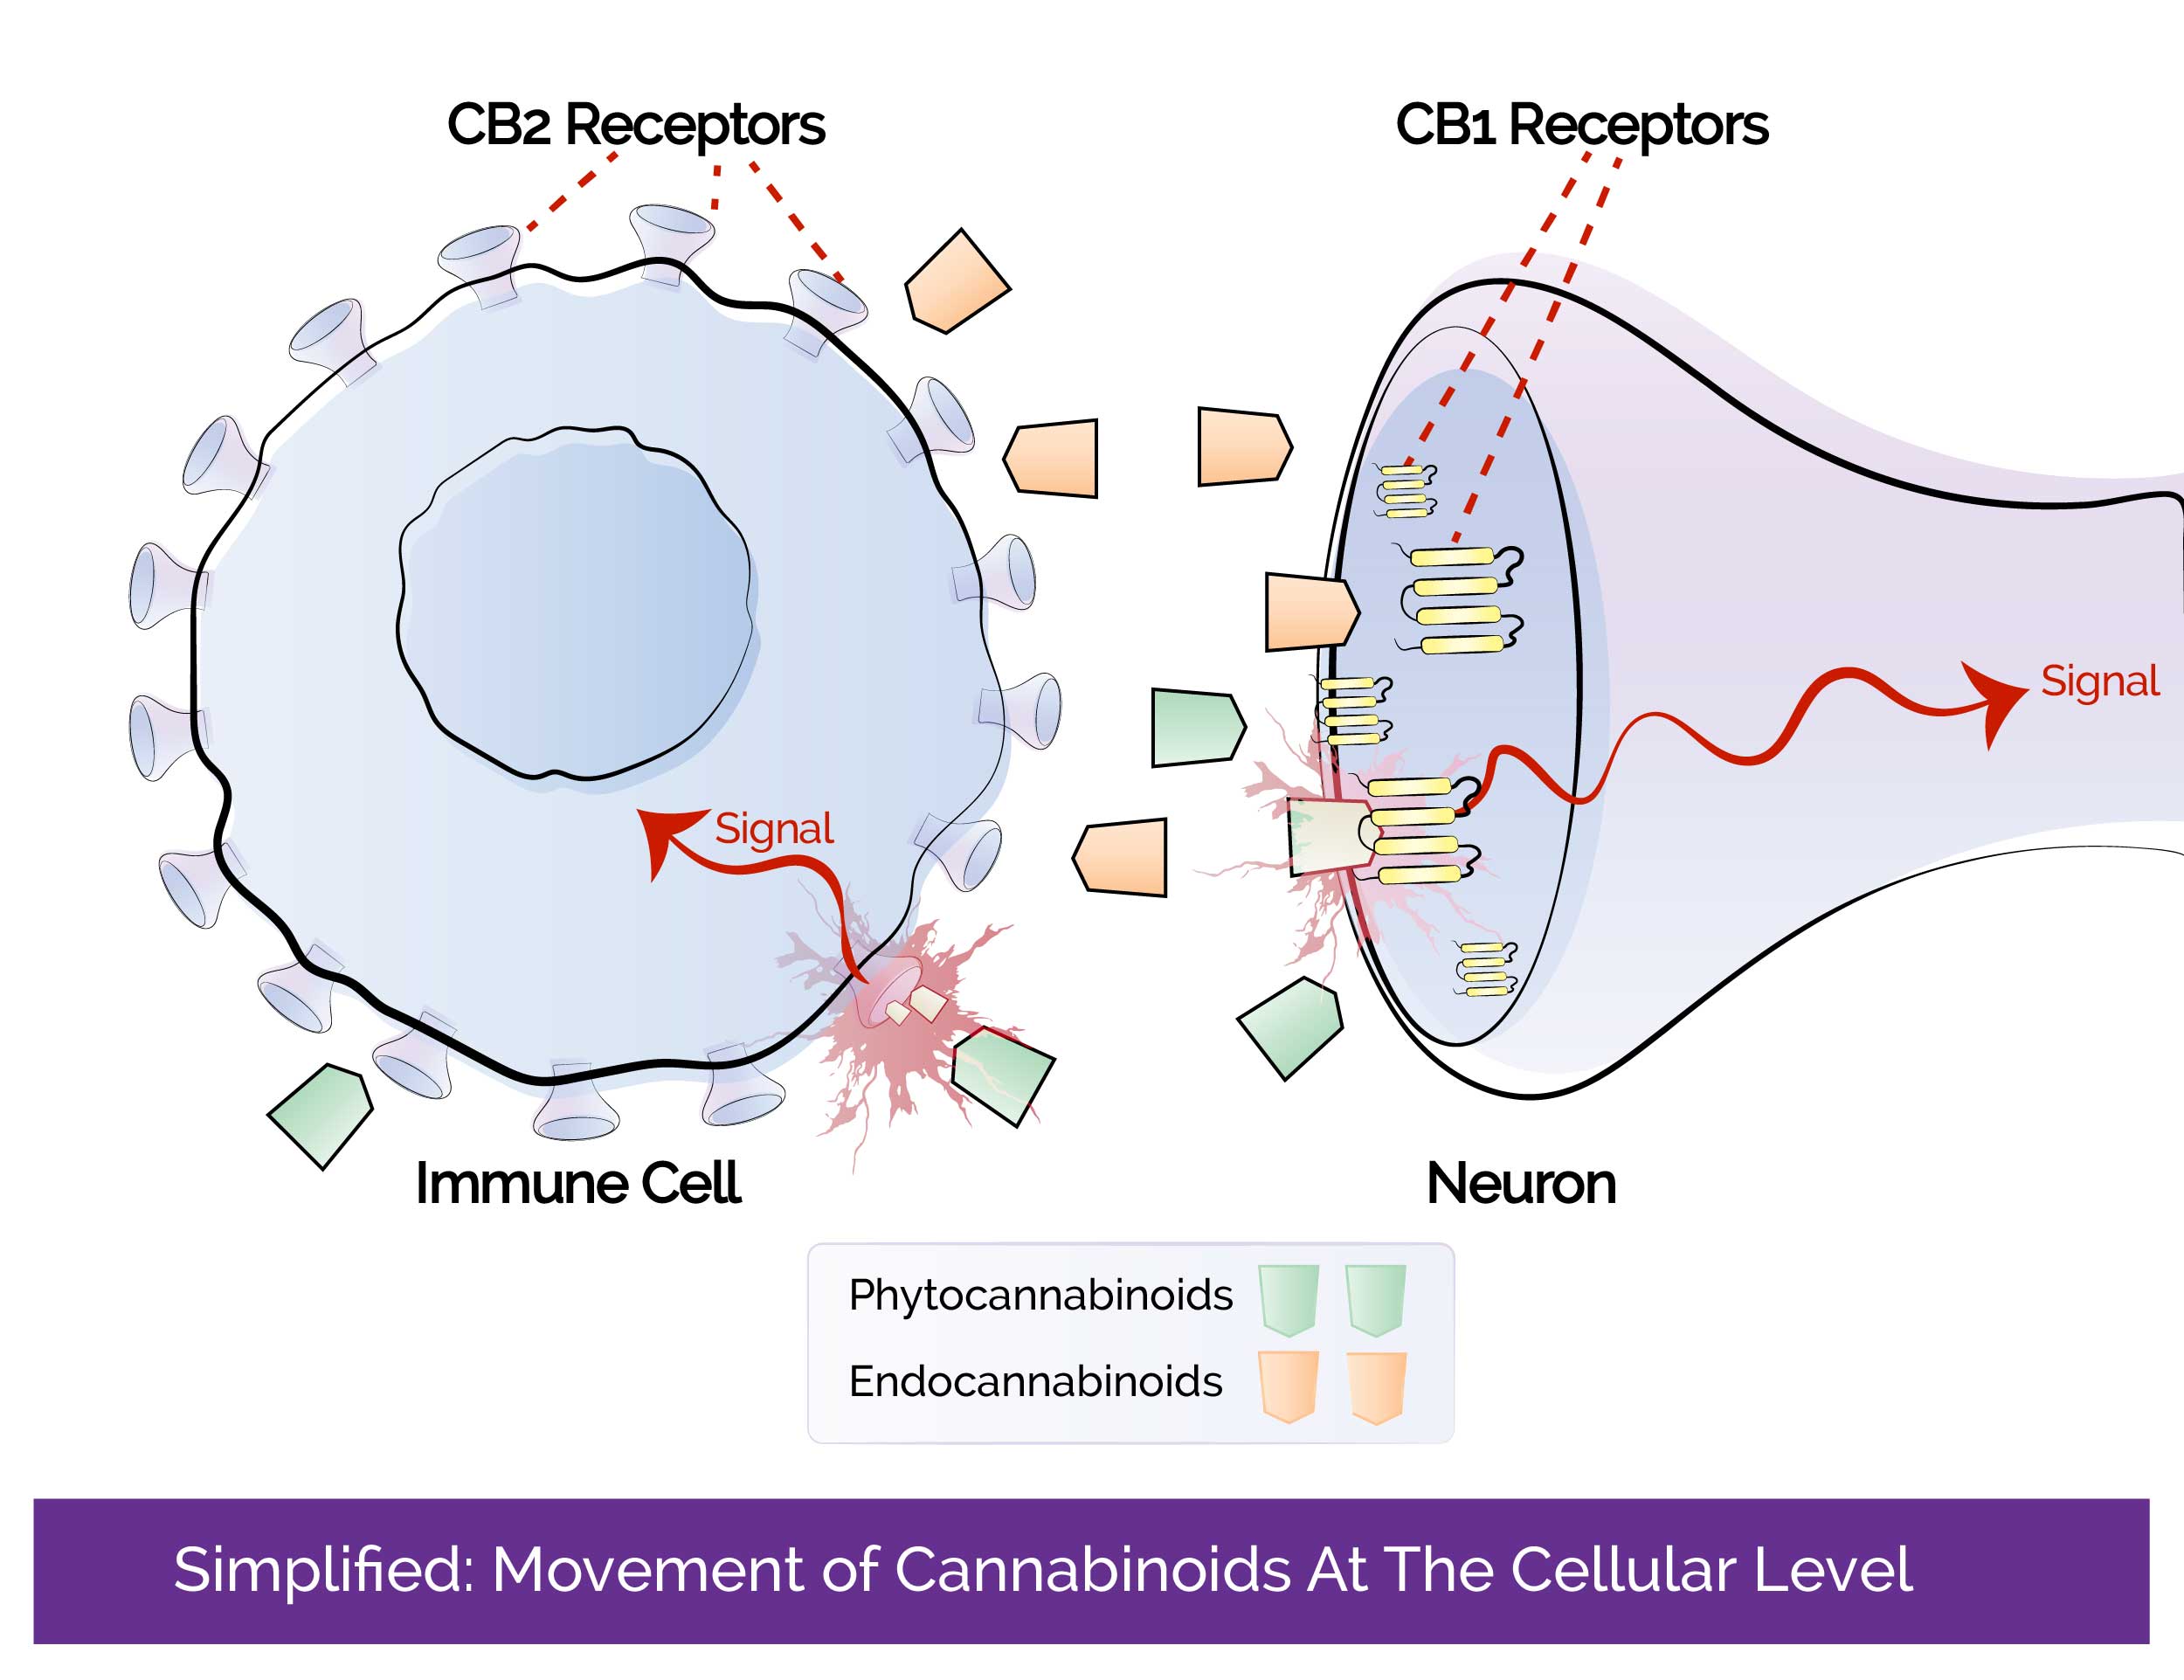 Bi-directional movement of phytocannabinoids and endocannbinoids. Features immune cell and neuron.